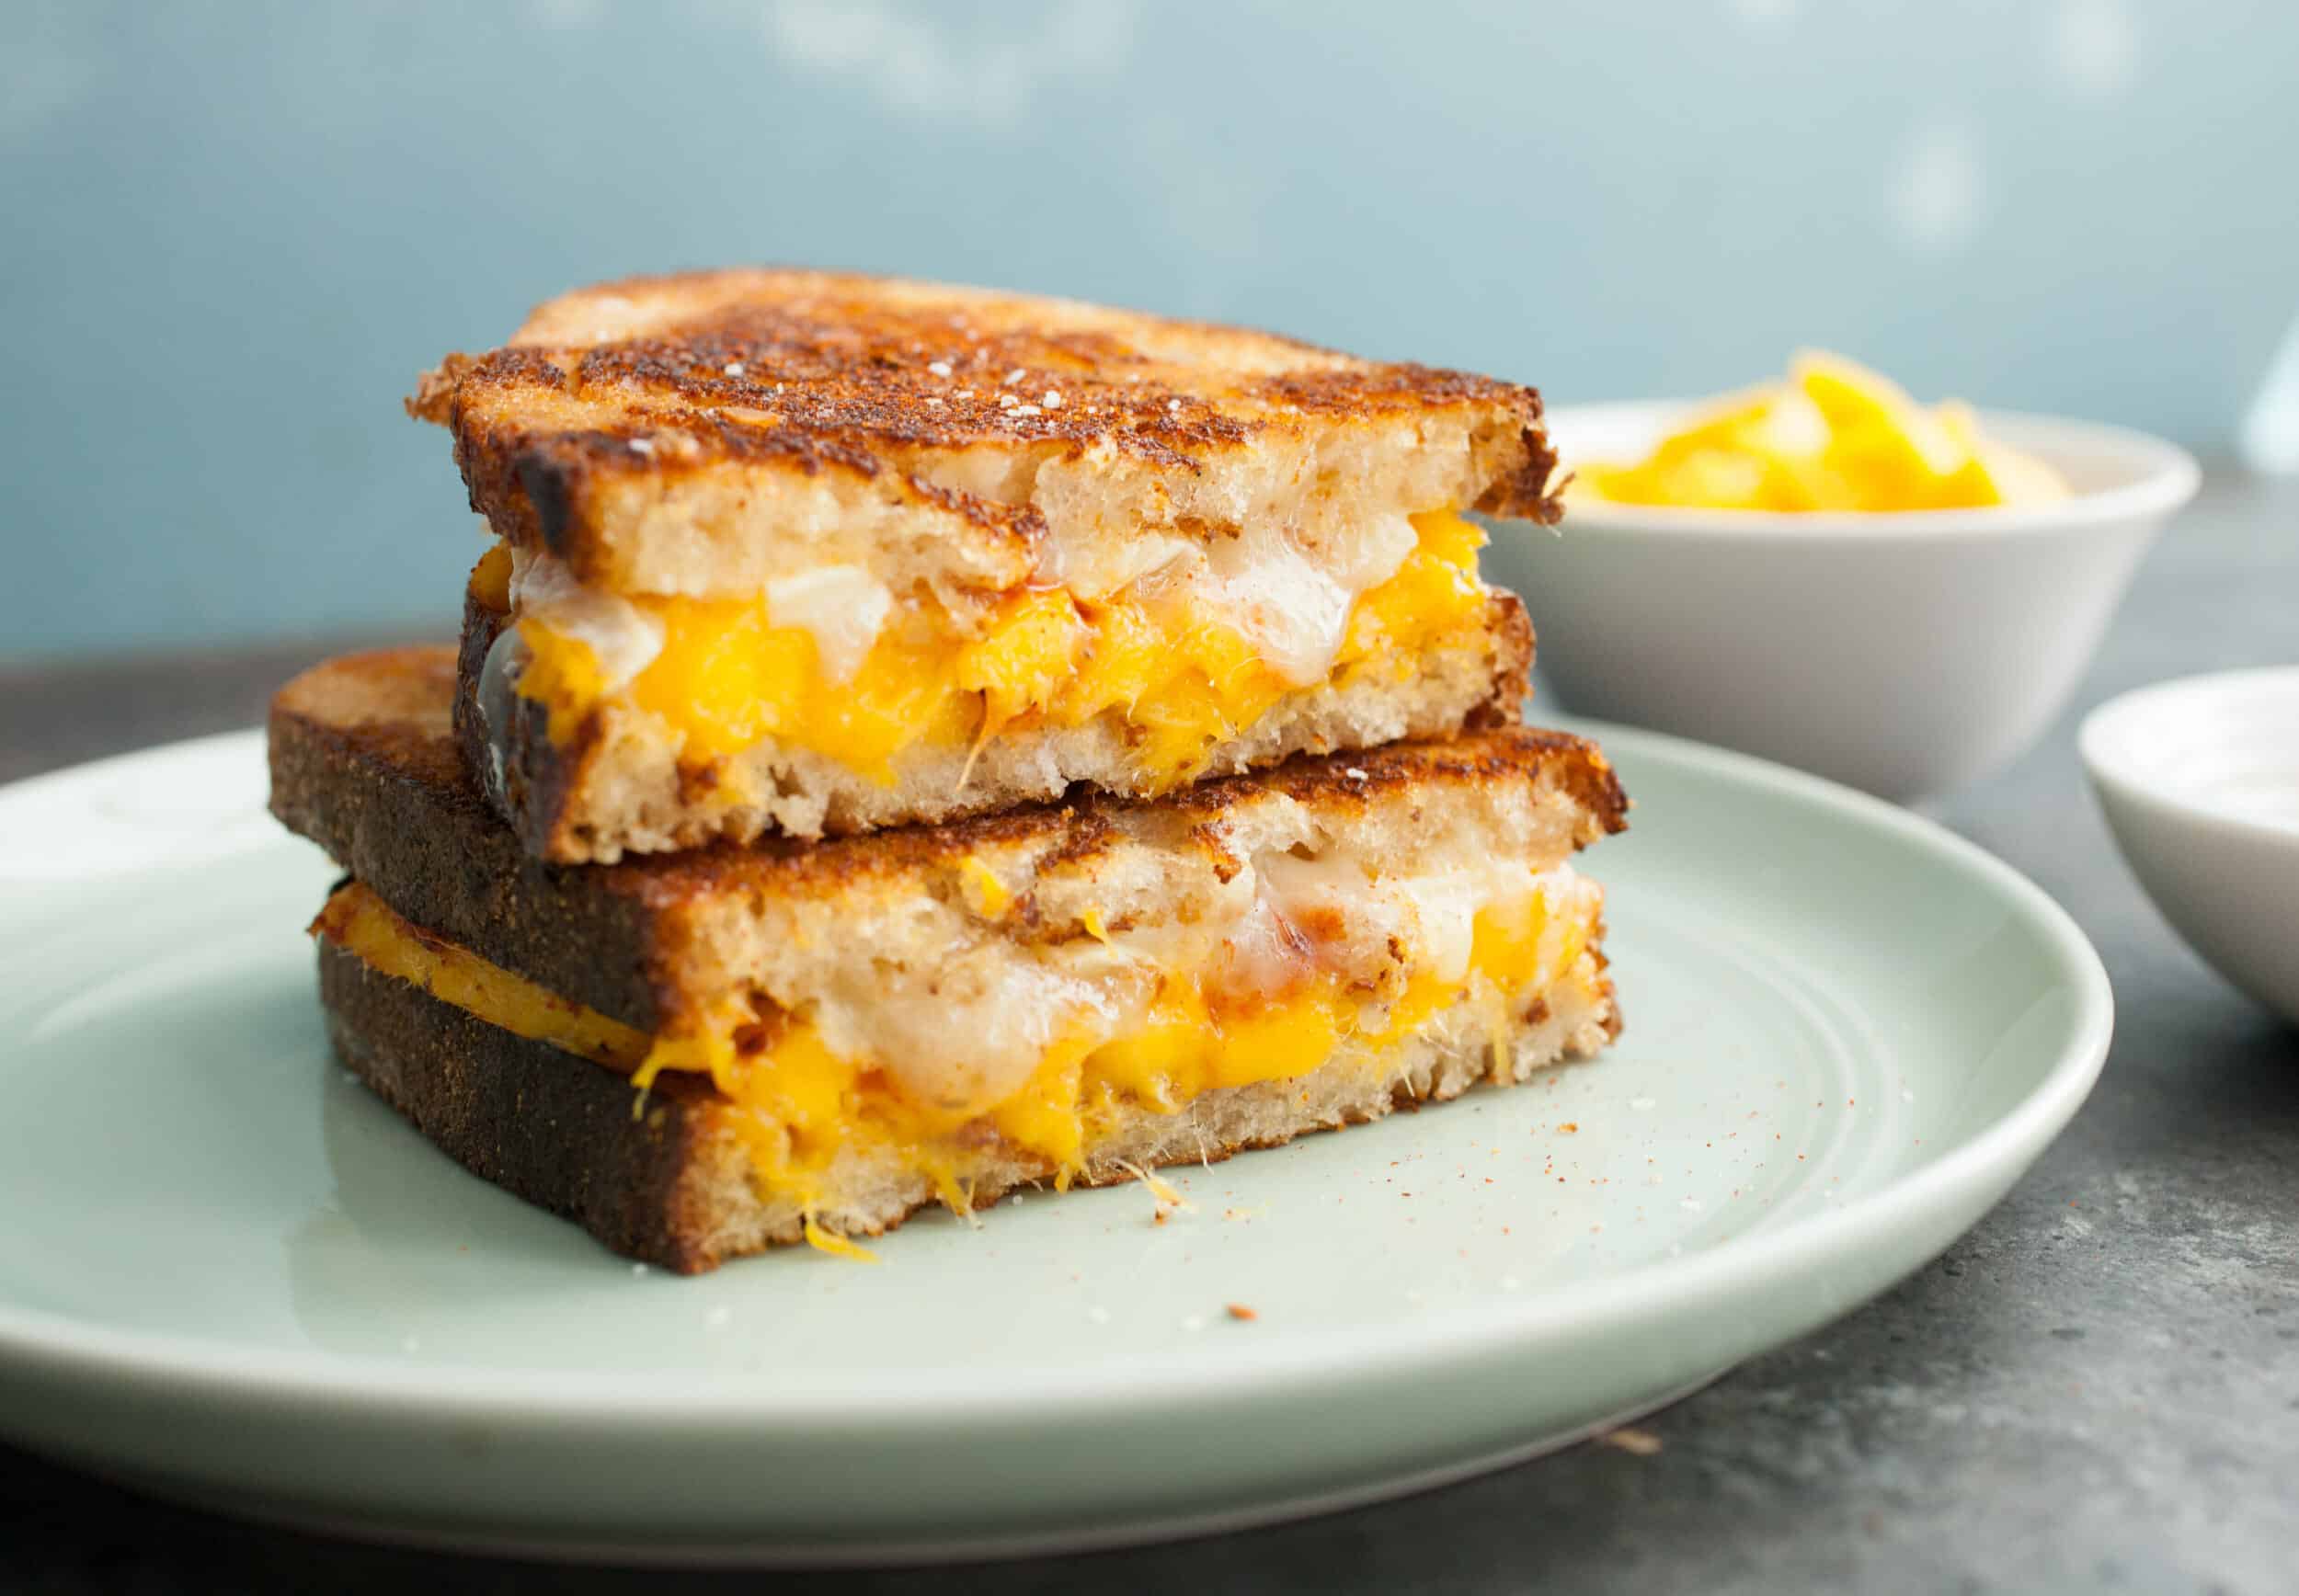 Chili Mango Brie Grilled Cheese: Chili and mango are made to be together and they perfectly with a creamy brie cheese in this grilled cheese sandwich. It's your new favorite thing. Trust me. | macheesmo.com